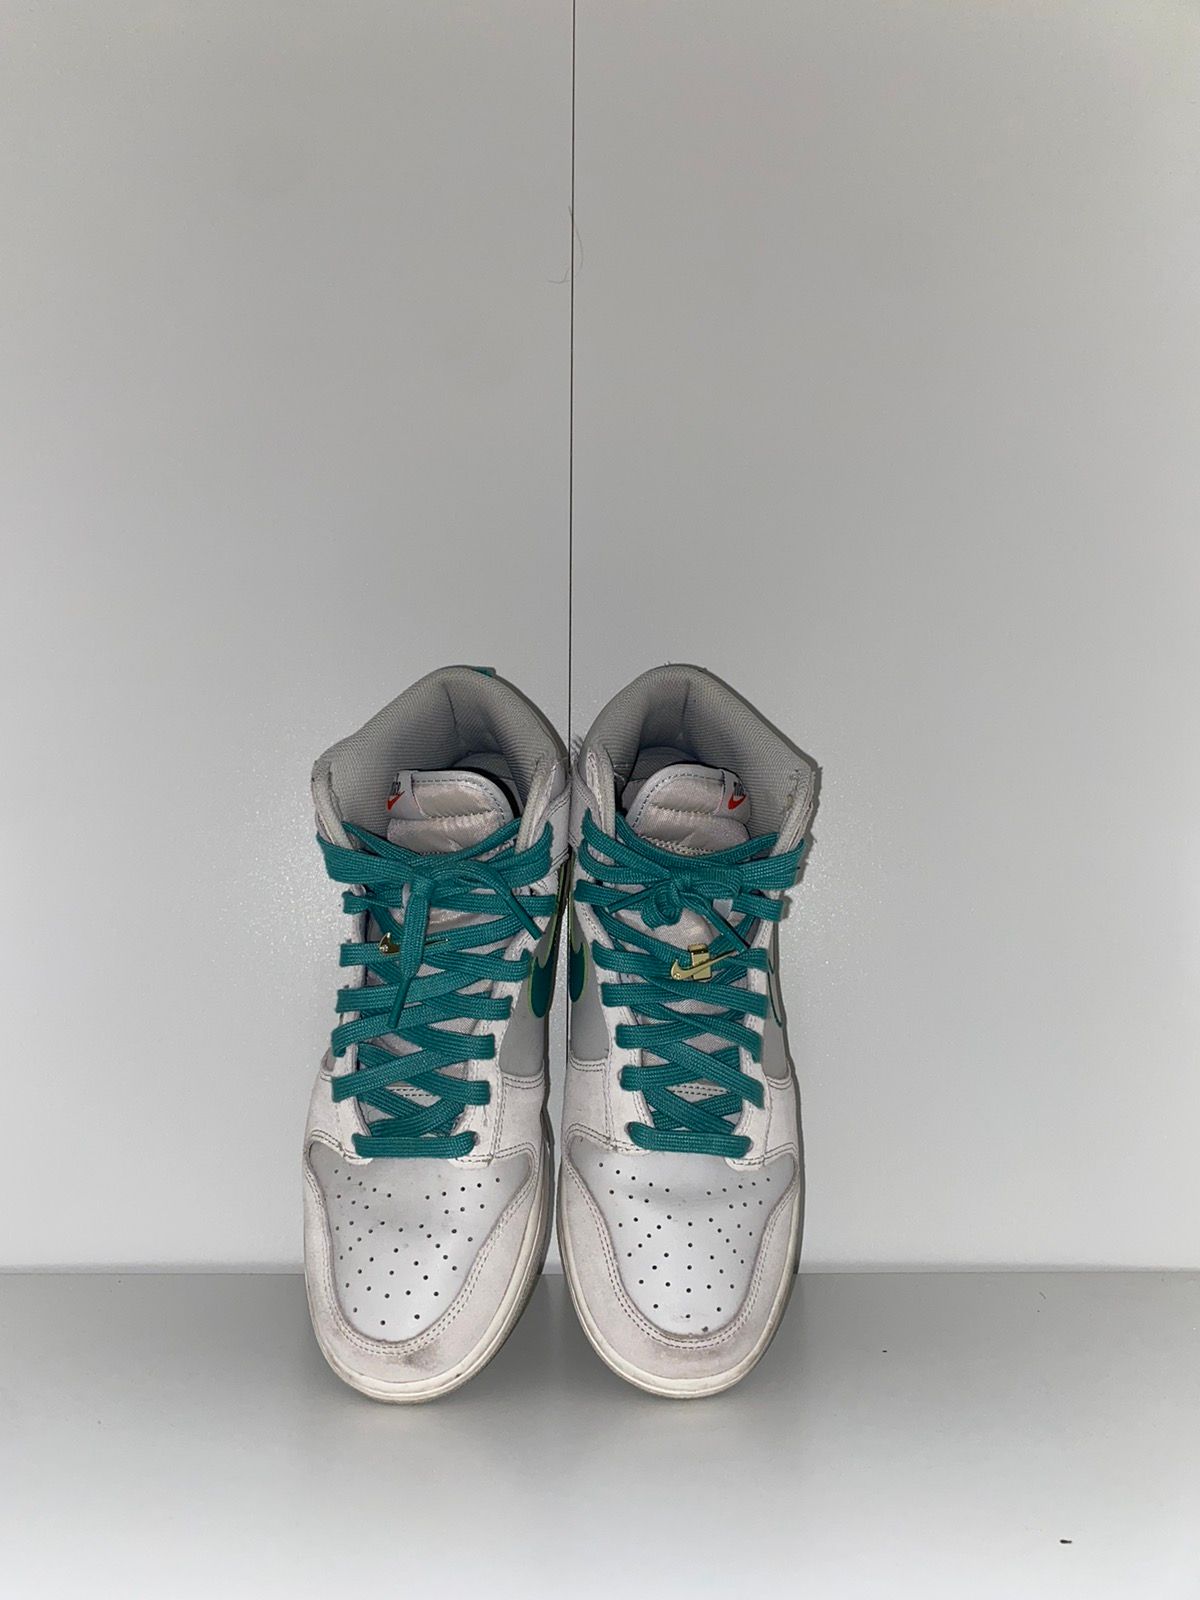 Nike Dunk High SE “First Use Pack-Green Noise” Size US 9.5 / EU 42-43 - 3 Thumbnail